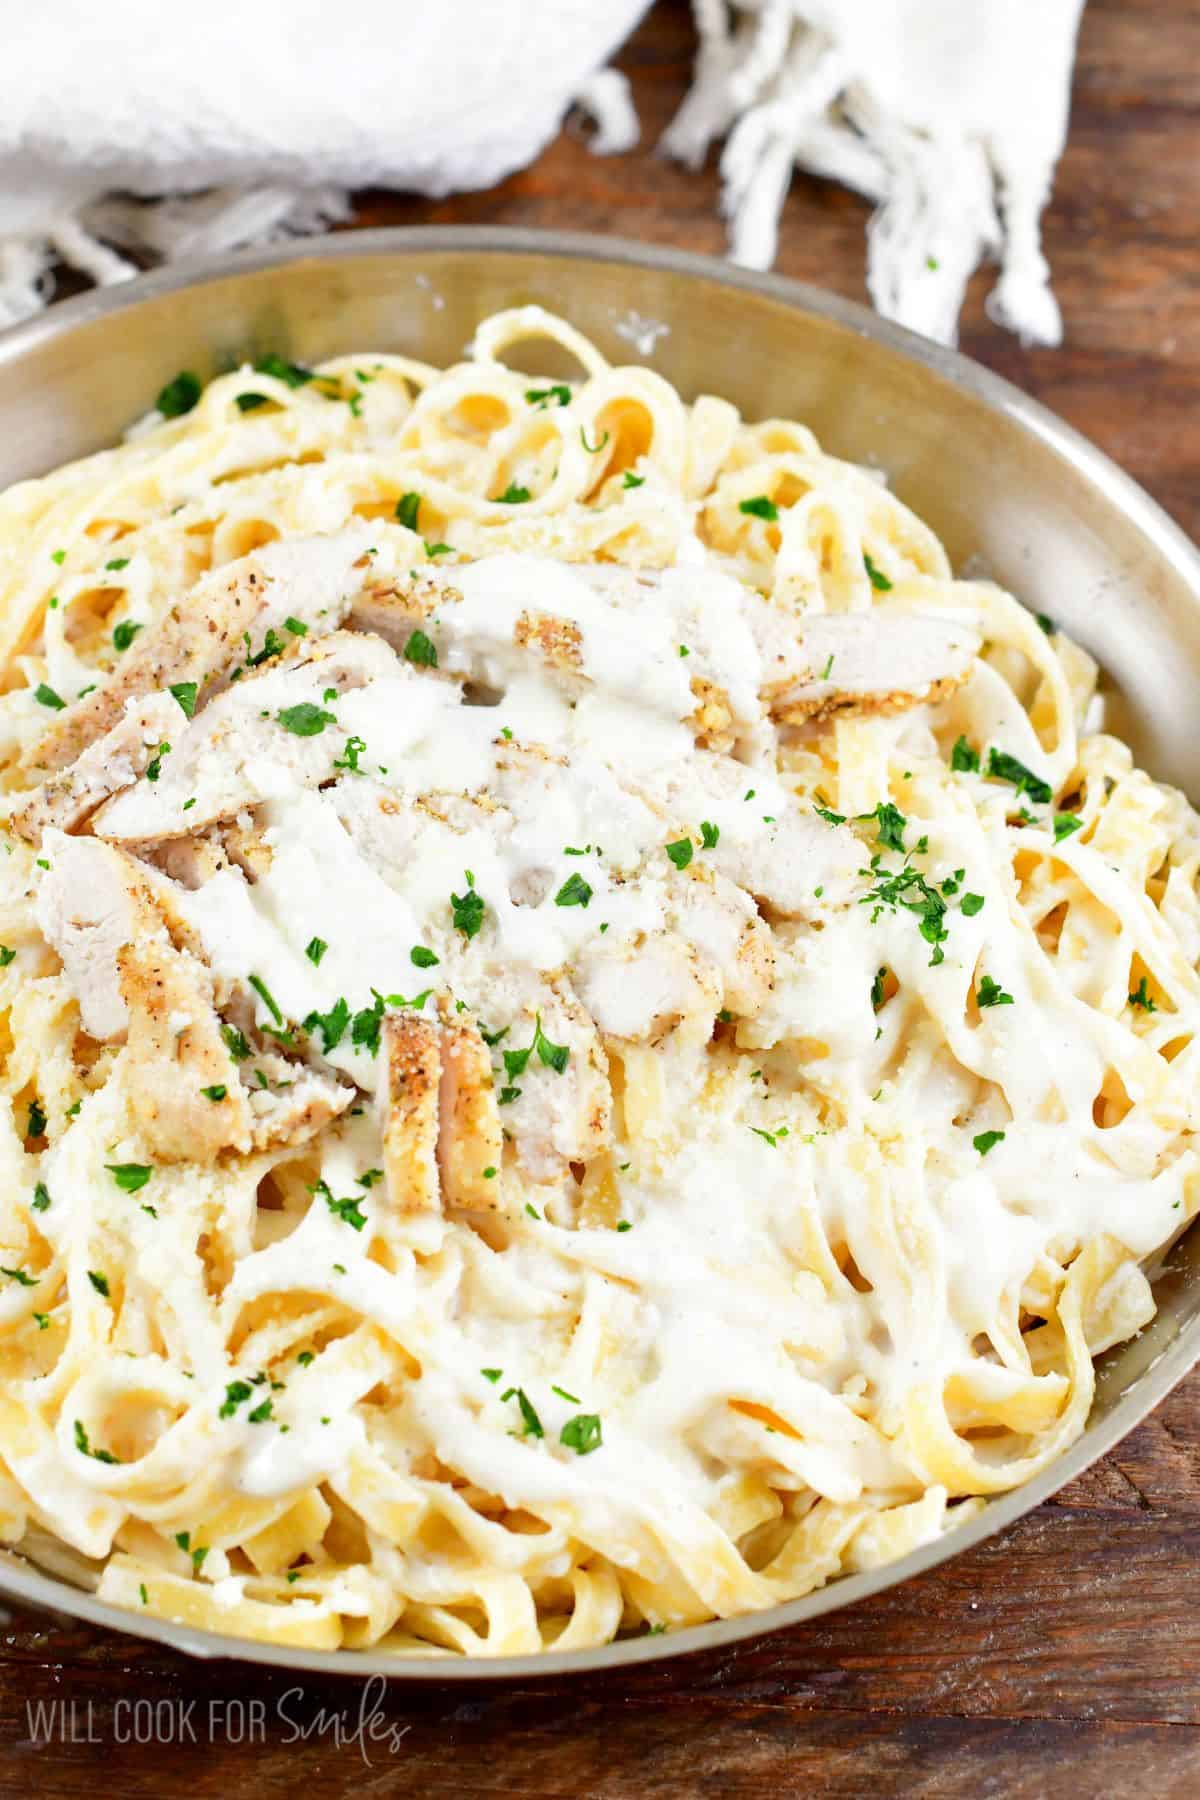 Chicken alfredo in a pan on a wood surface.